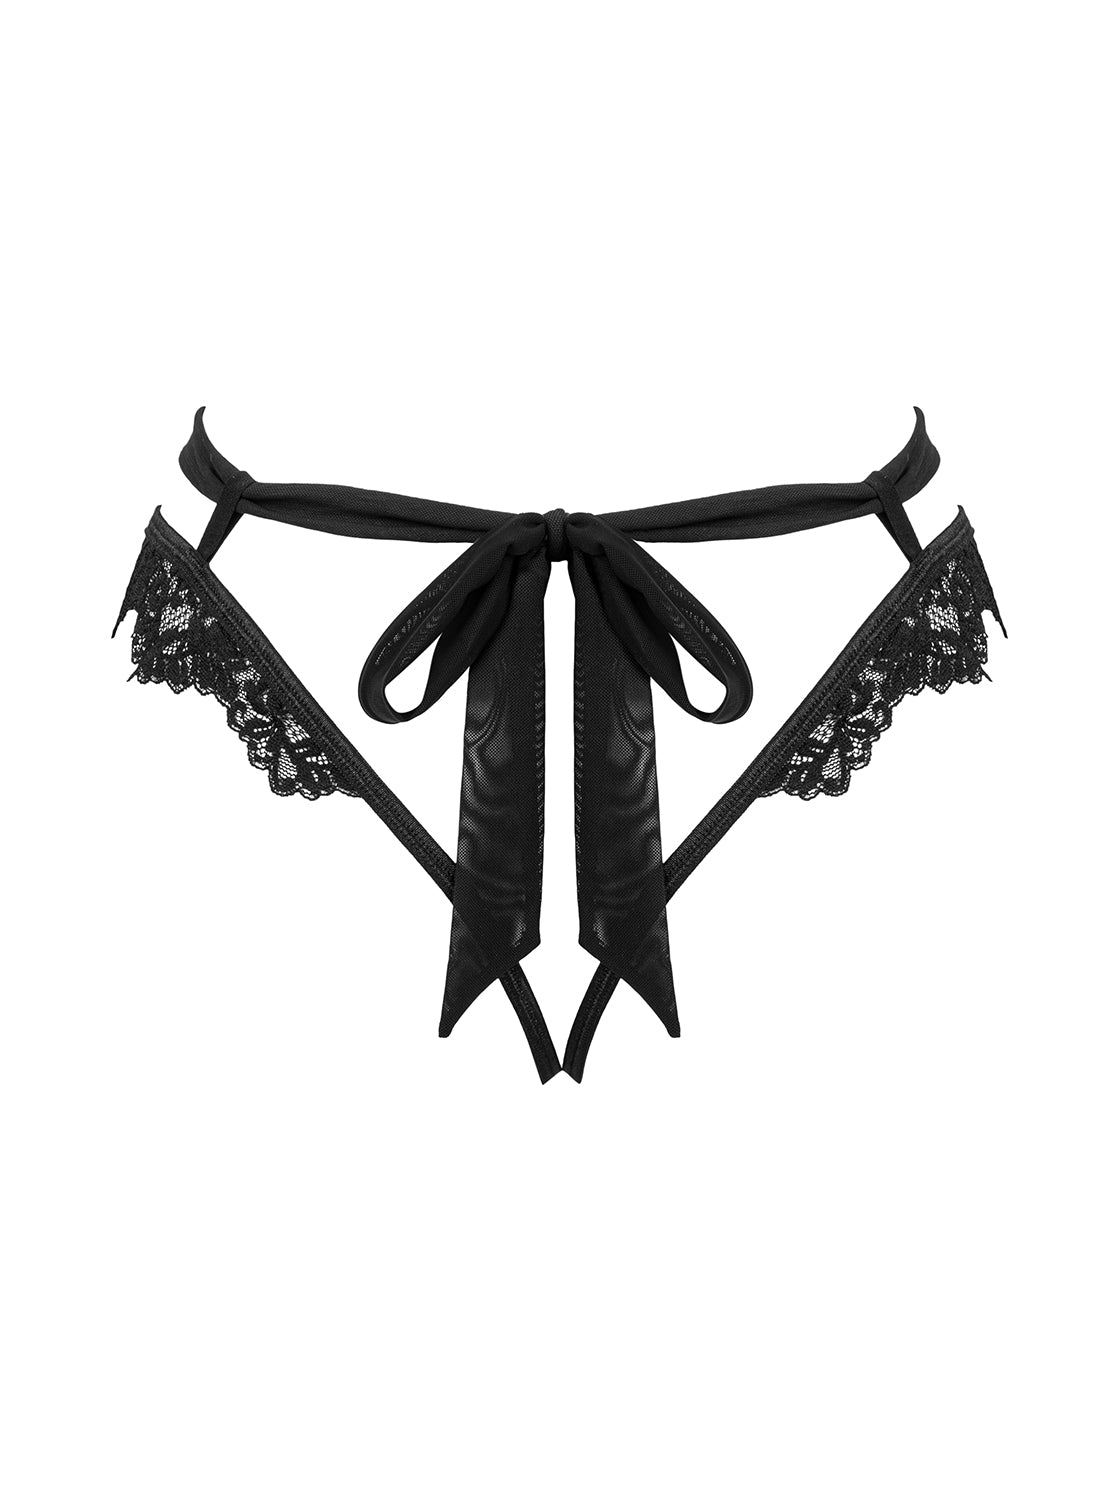 Setilla a cute black panty made of translucent material and elegant lace with open crotch